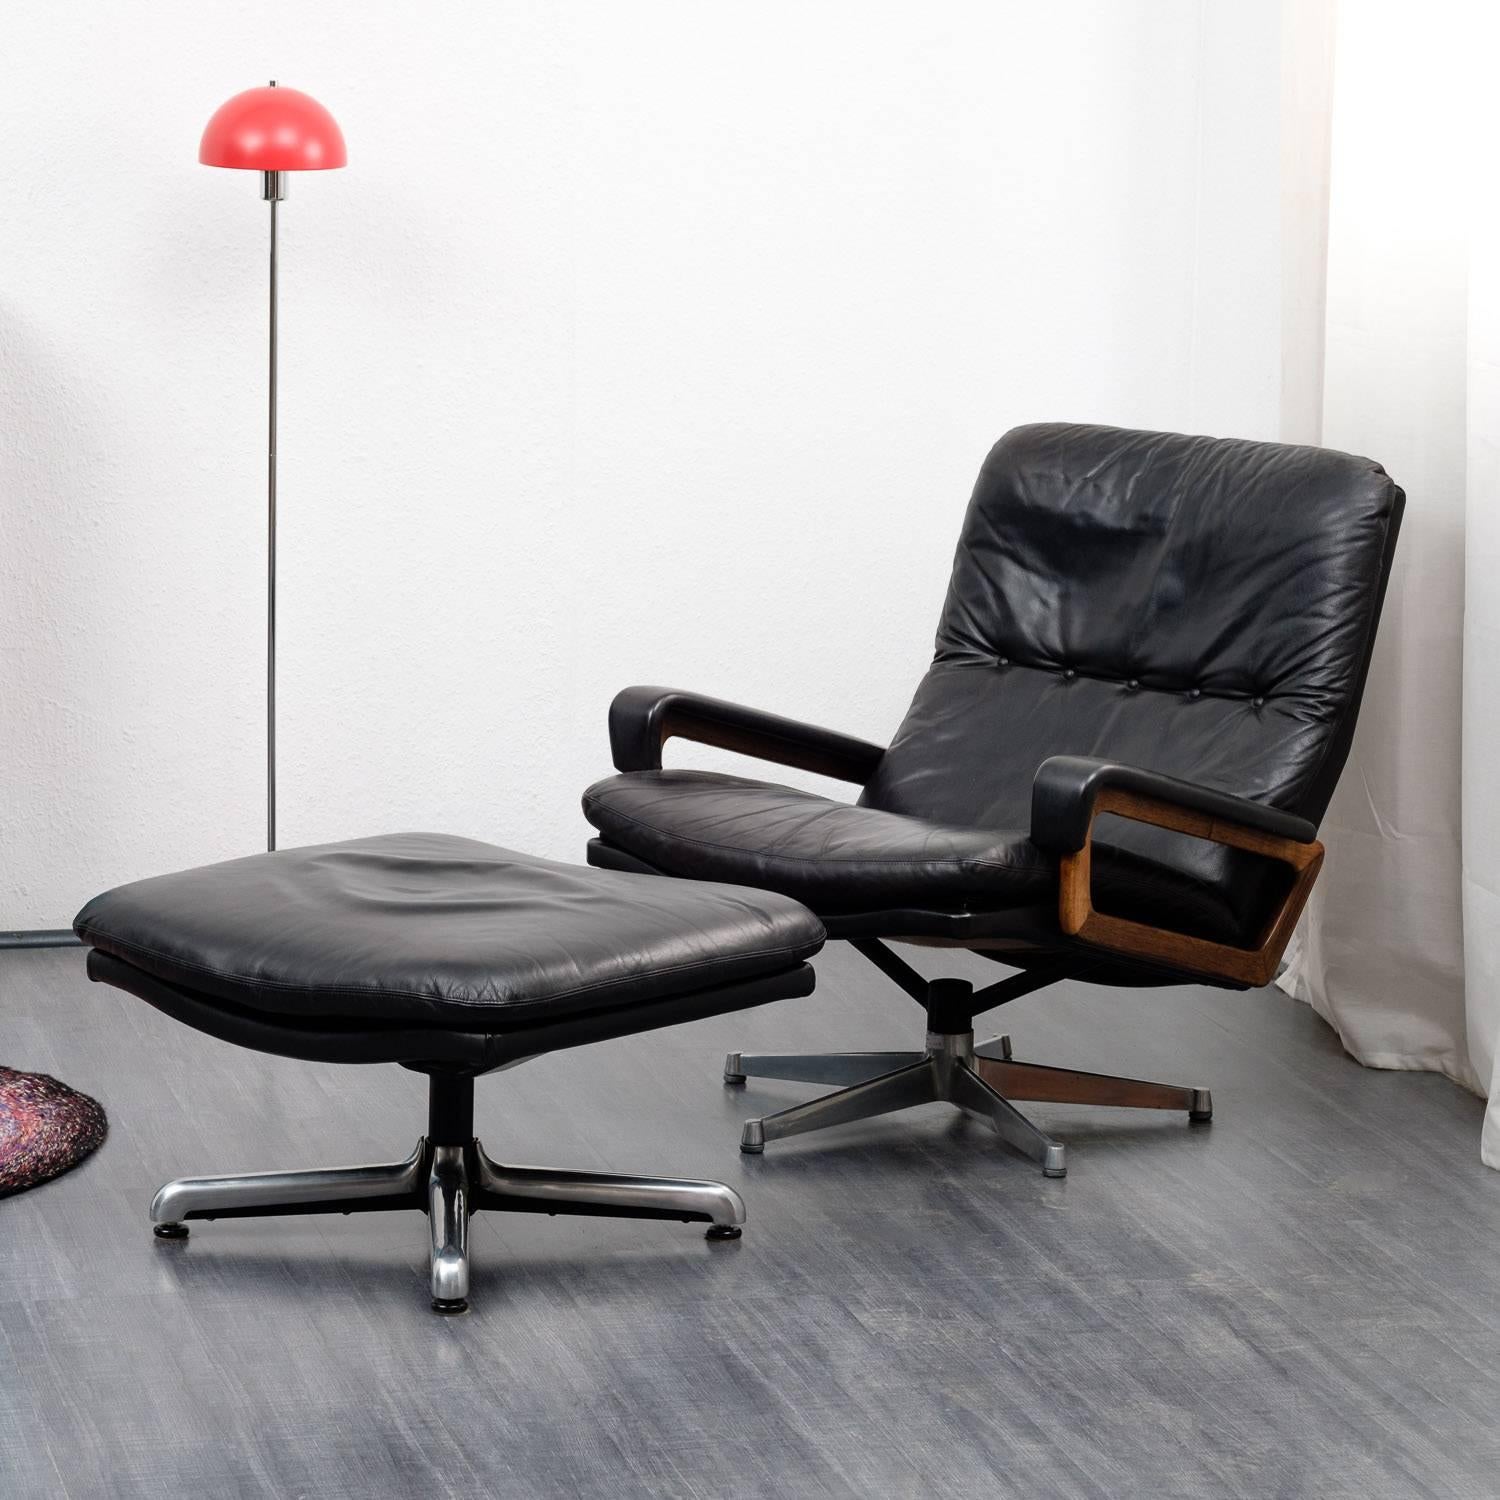 A Swiss made design classic from the 1970s:
The King chair by Strässle in black leather with rosewood armrests. High-quality materials and workmanship. The chair comes with the matching foot-stool. Good original condition with small traces of wear